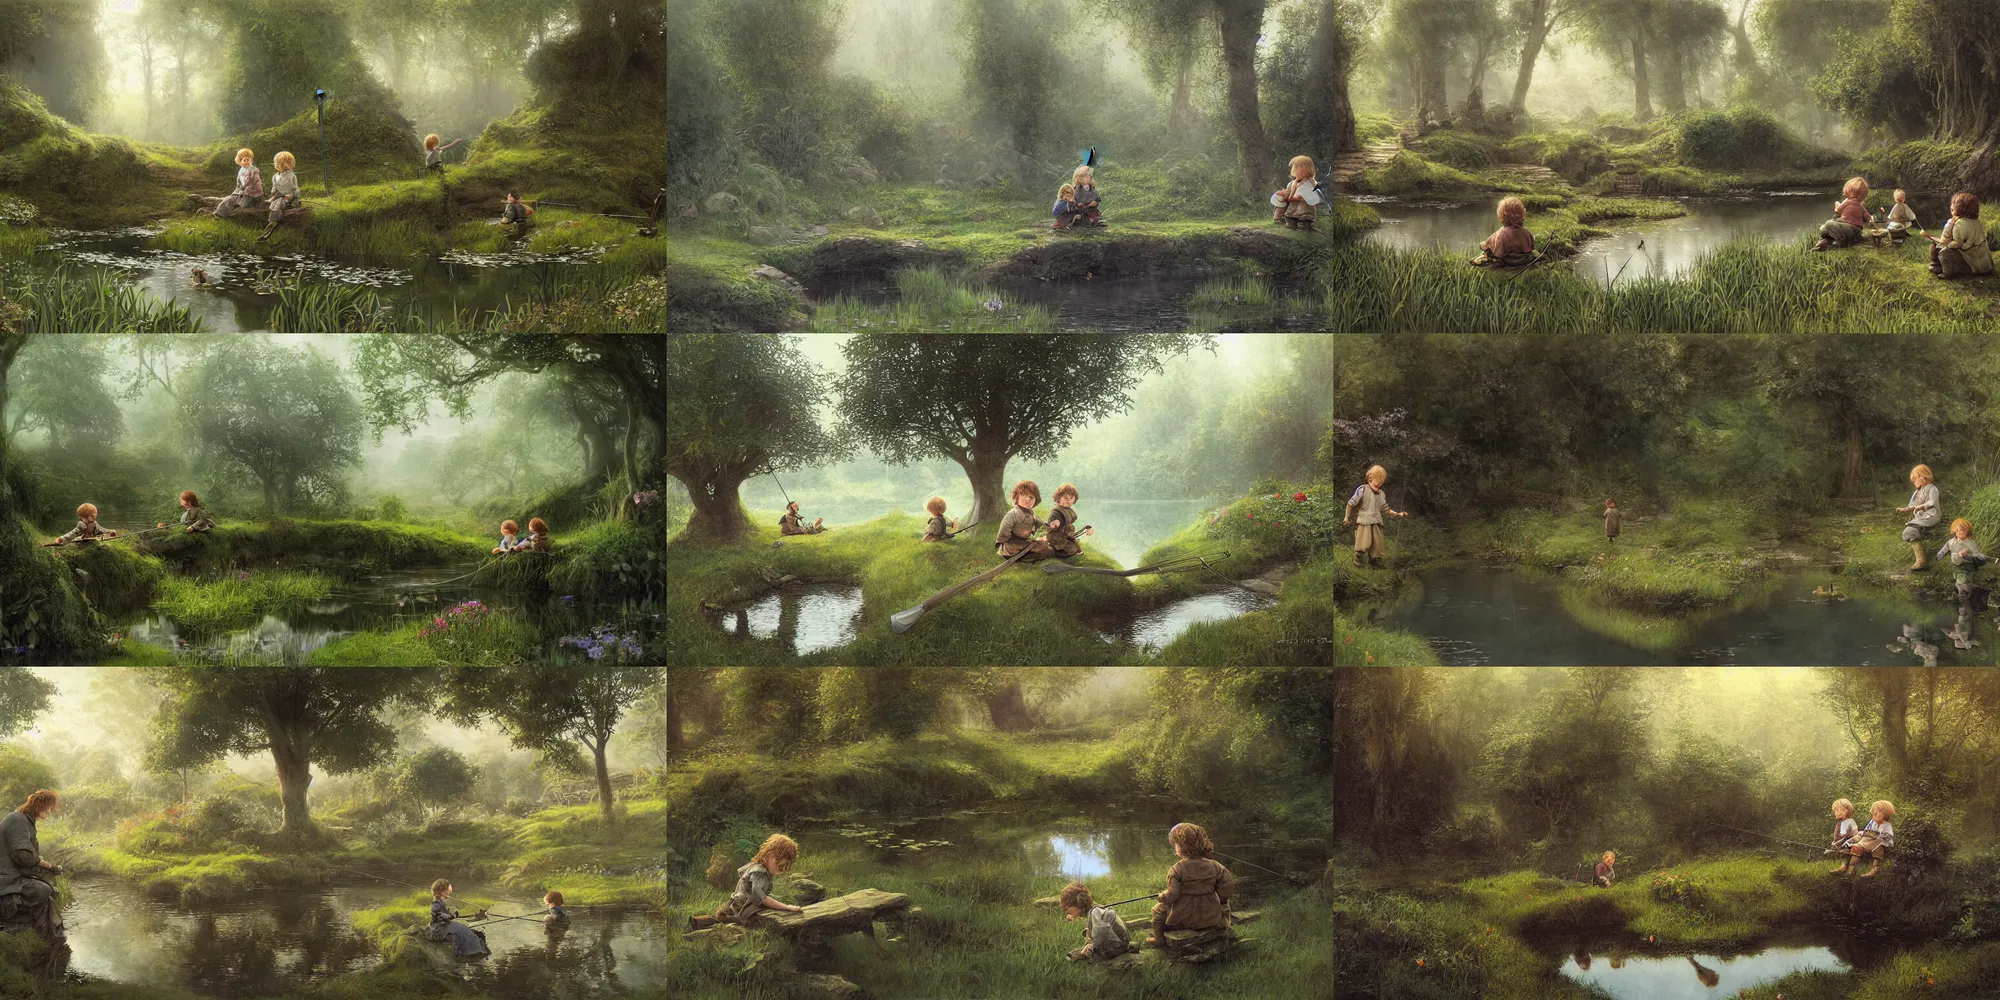 Prompt: two hobbit children sit with fishing poles near a mirror like pond, by alan lee, springtime flowers and foliage in full bloom, dark foggy forest background, sunlight filtering through the trees, digital art, art station.